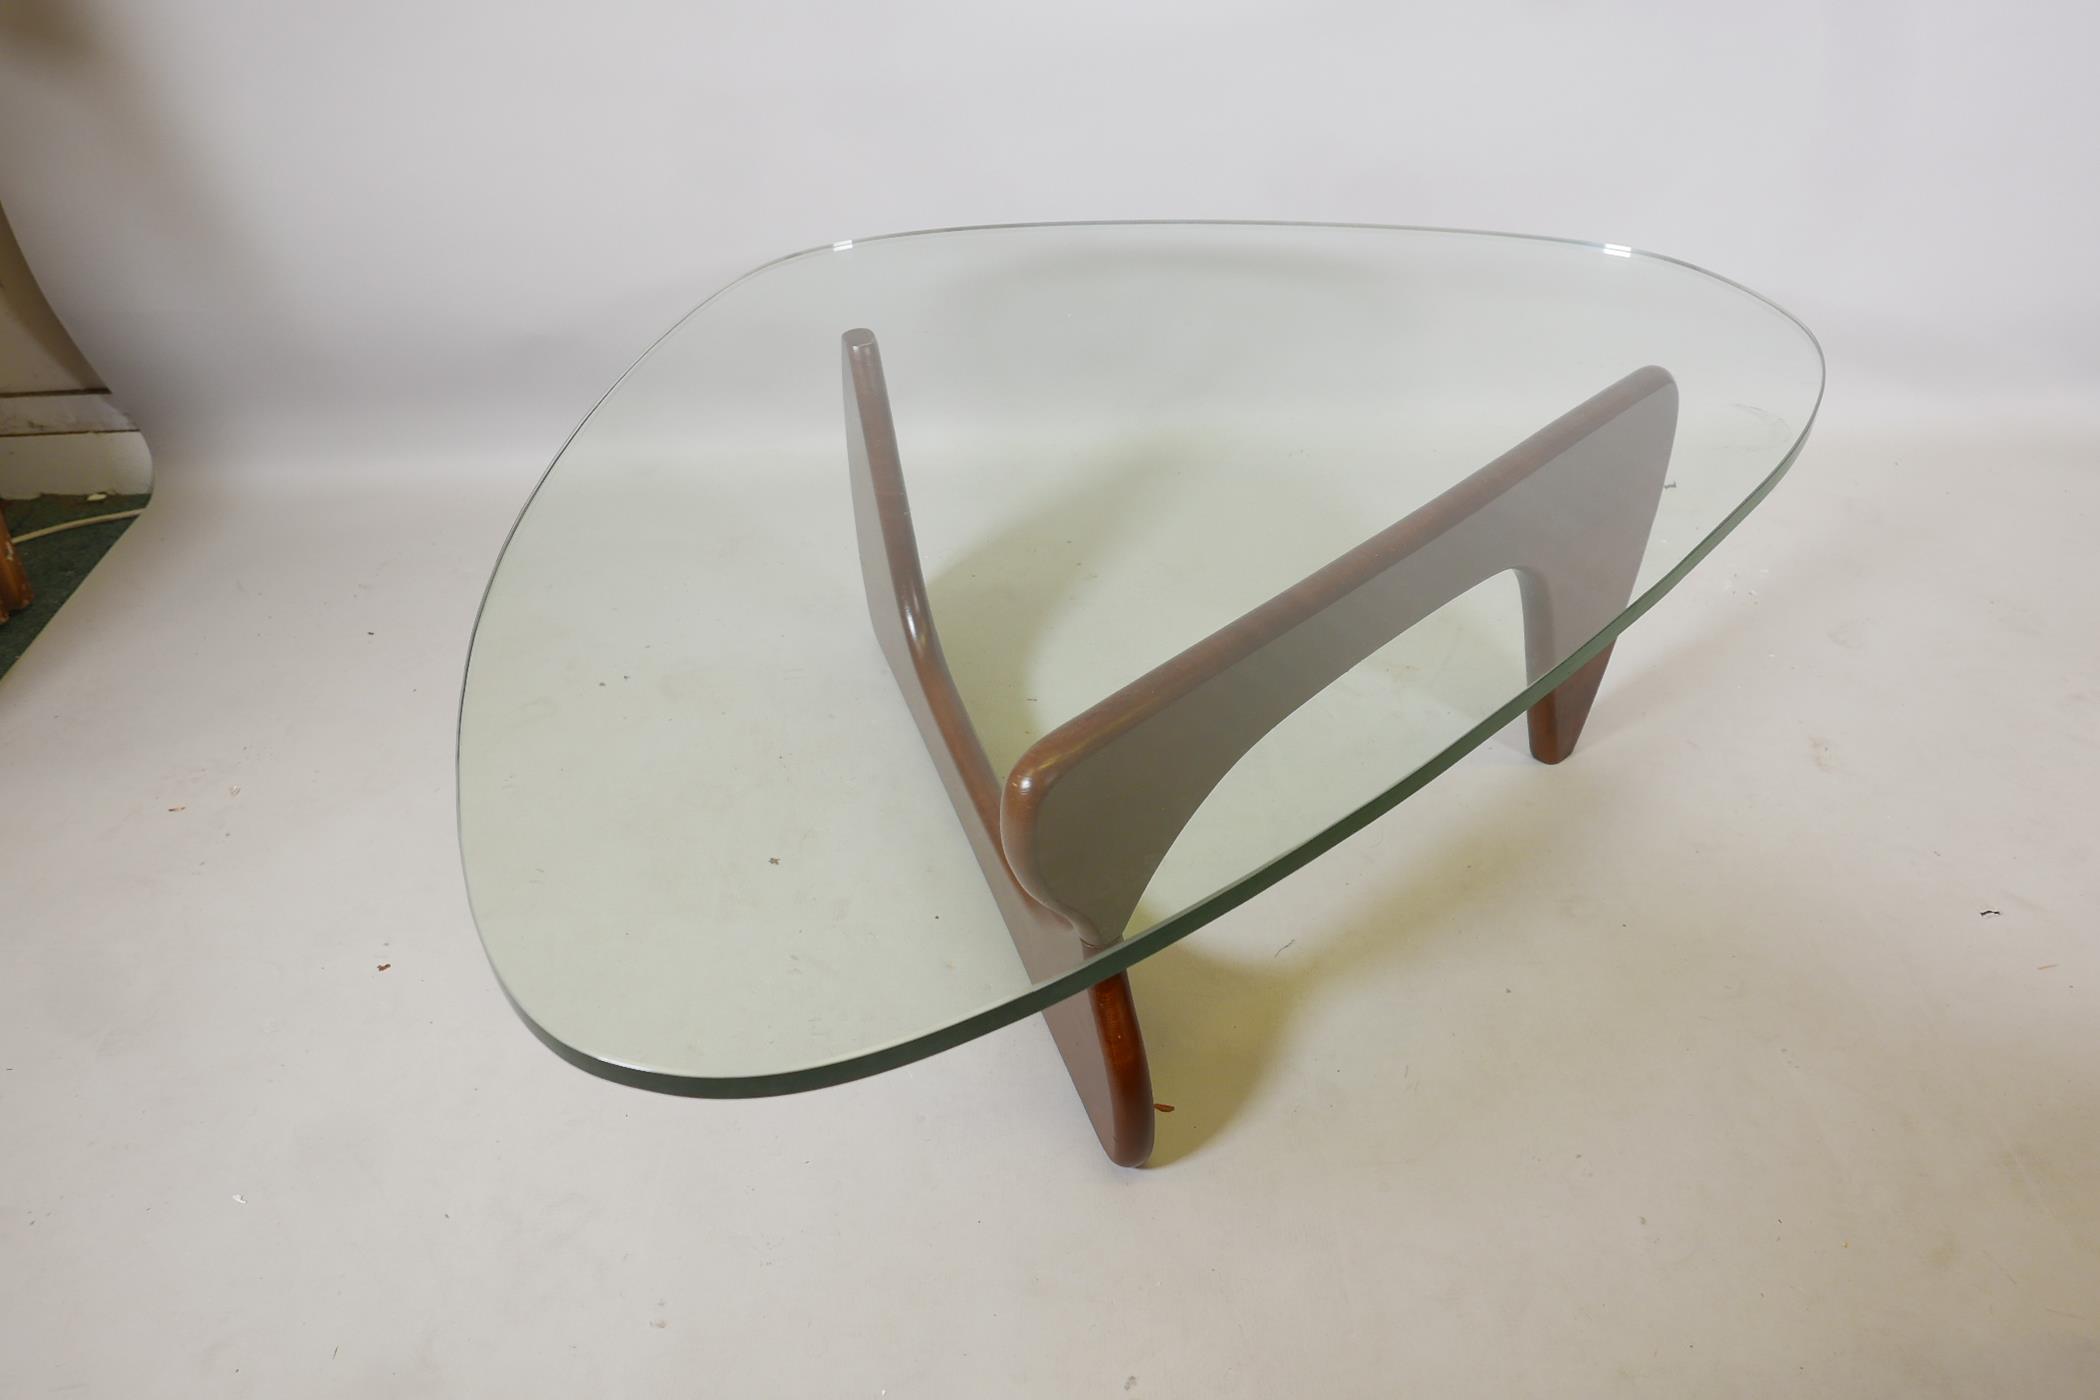 An Isamu Noguchi style pebble shaped coffee table with glass top, 50" x 37½", 16" high - Image 2 of 3